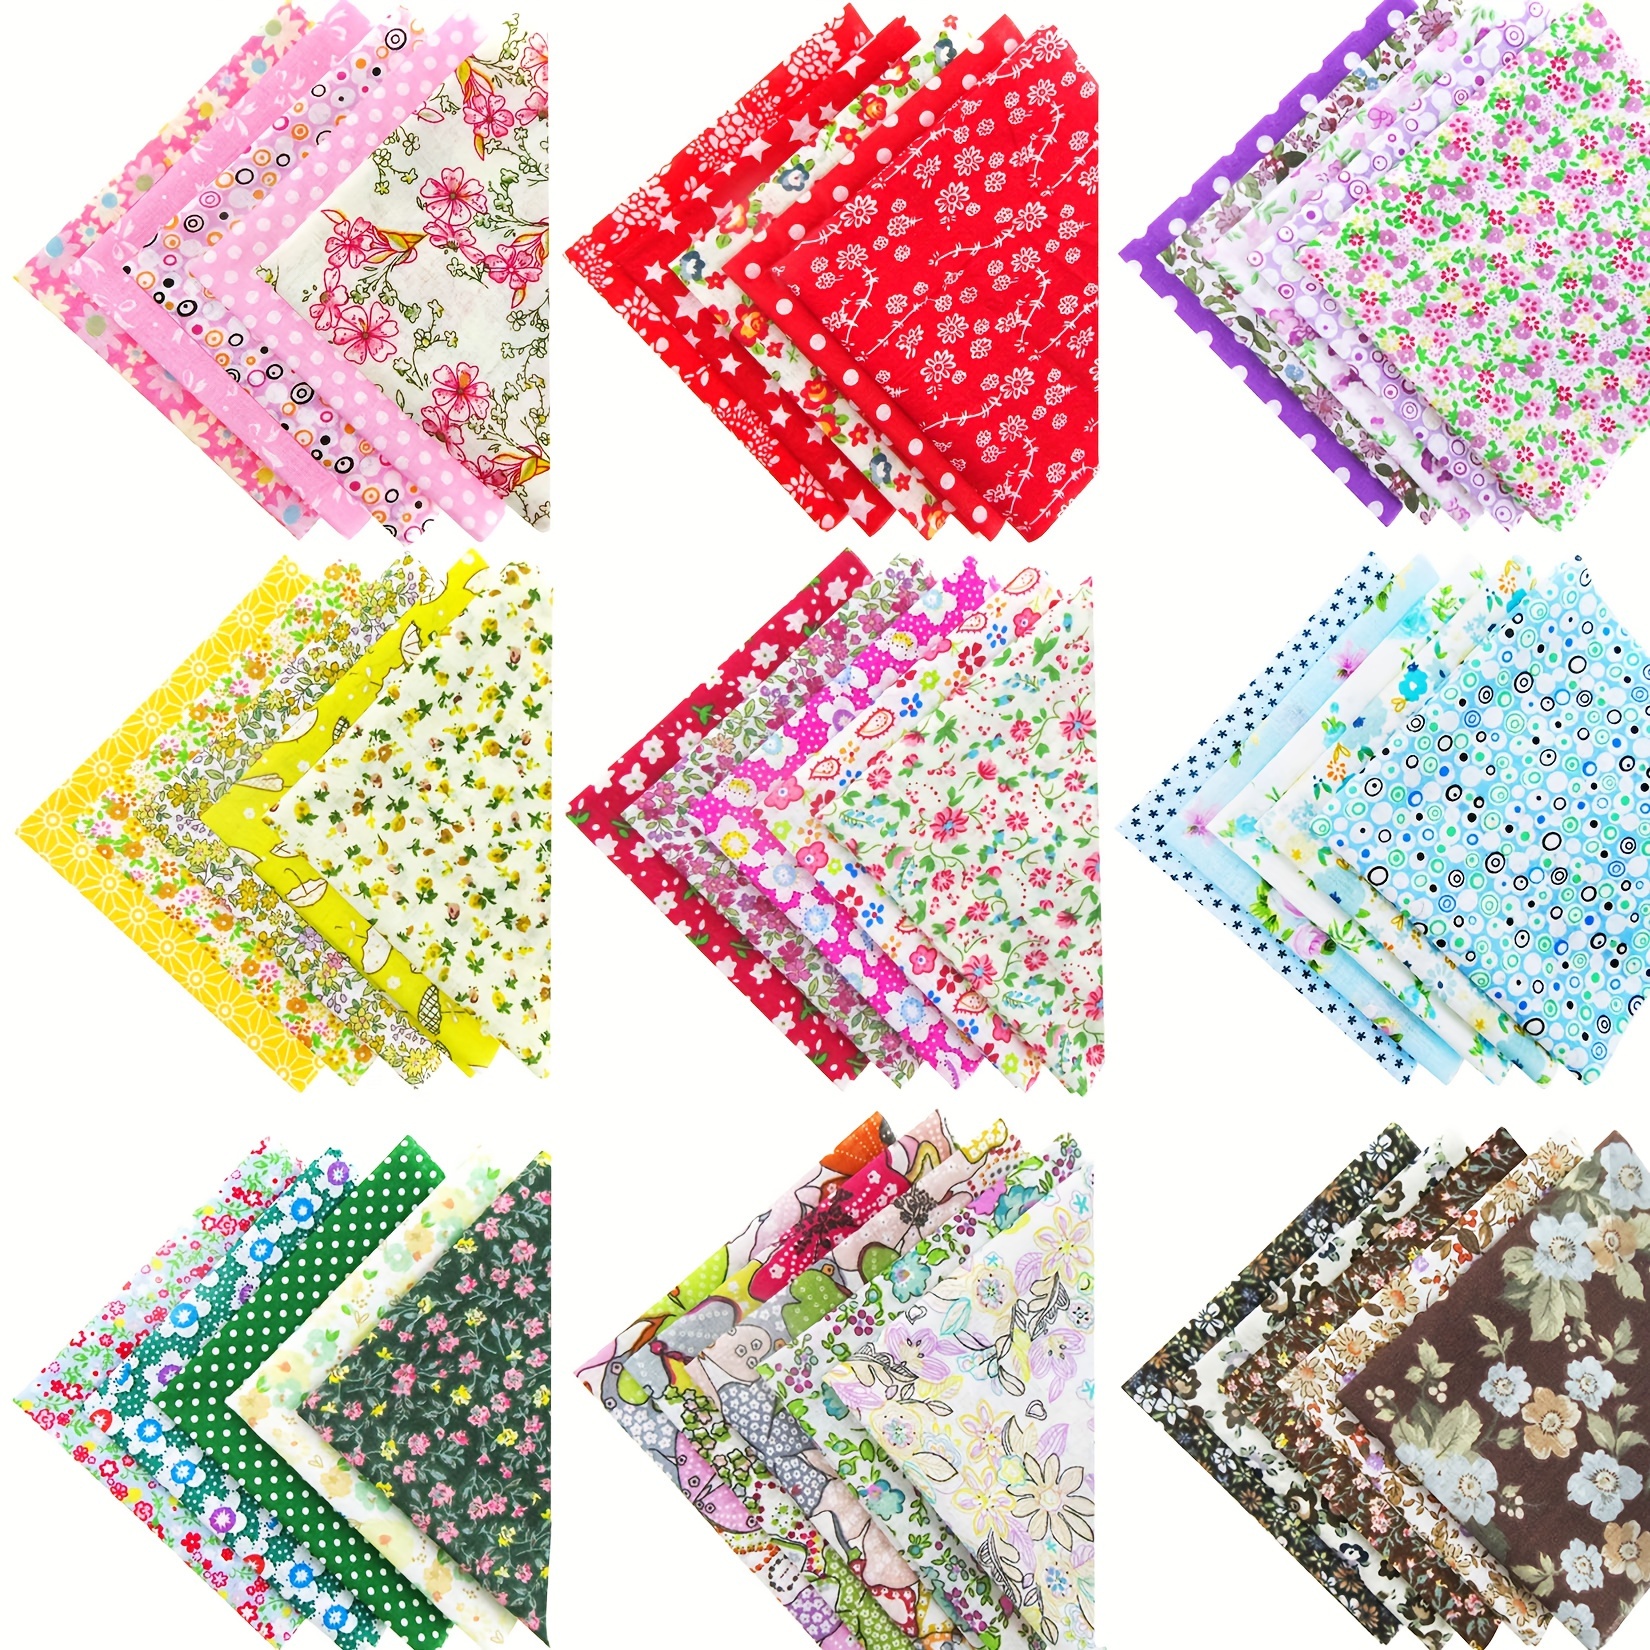 

100pcs 25×25cm Cotton Fabric, Sewing Fabric 100% Cotton Plain Fabric For Diy, Crafts, Projects, Quilting